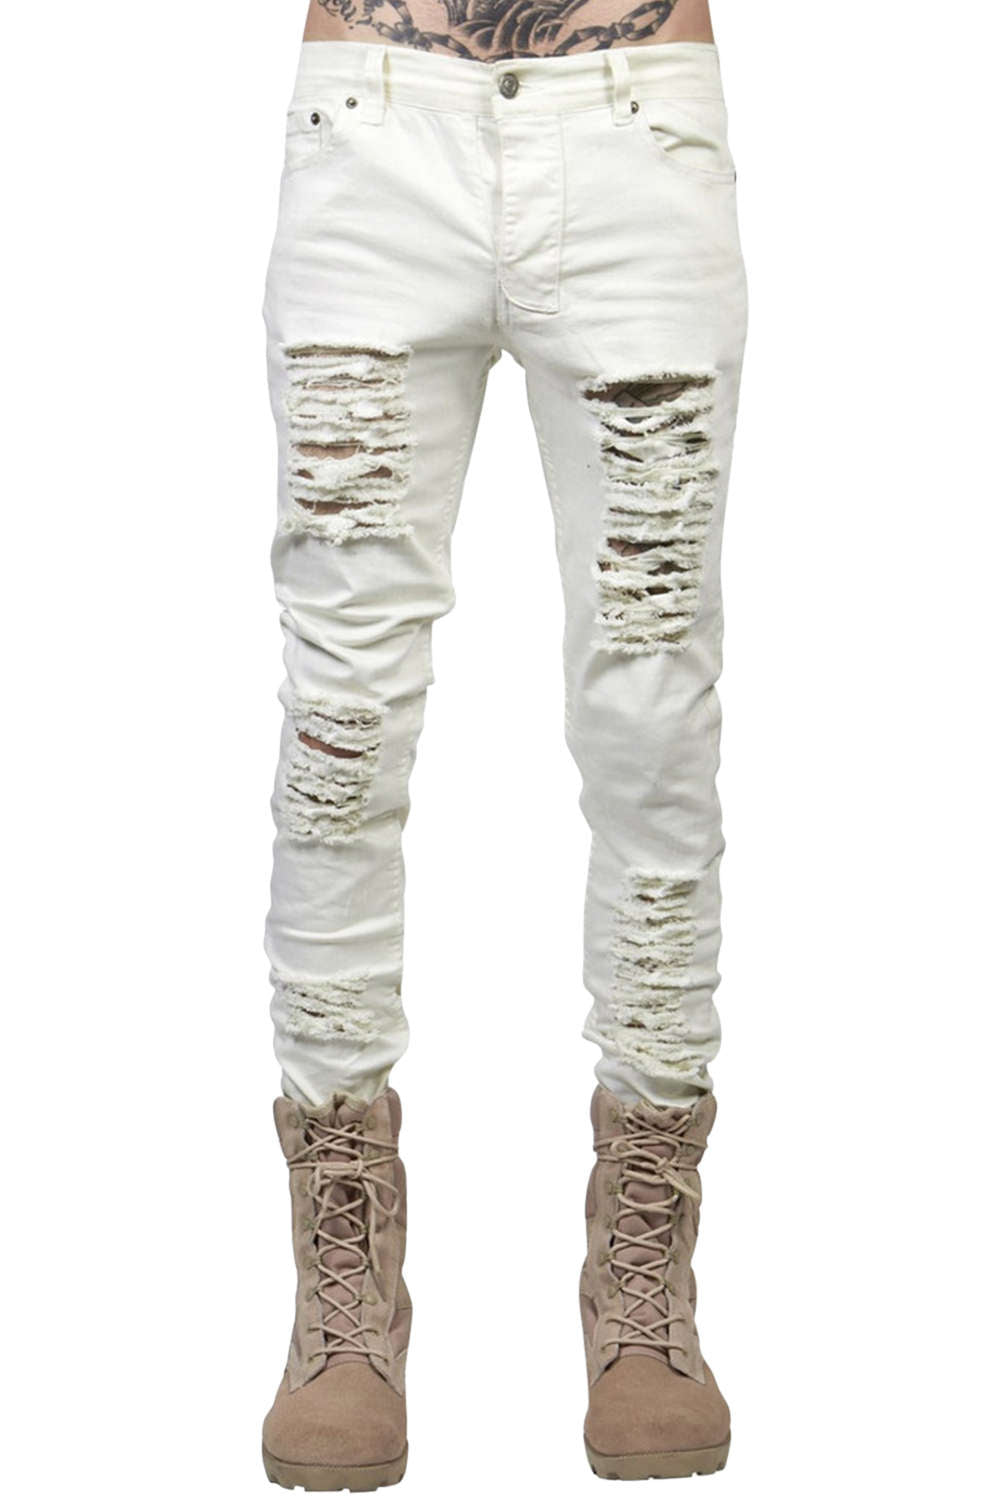 Iyasson Women's Low rise Ripped Pants